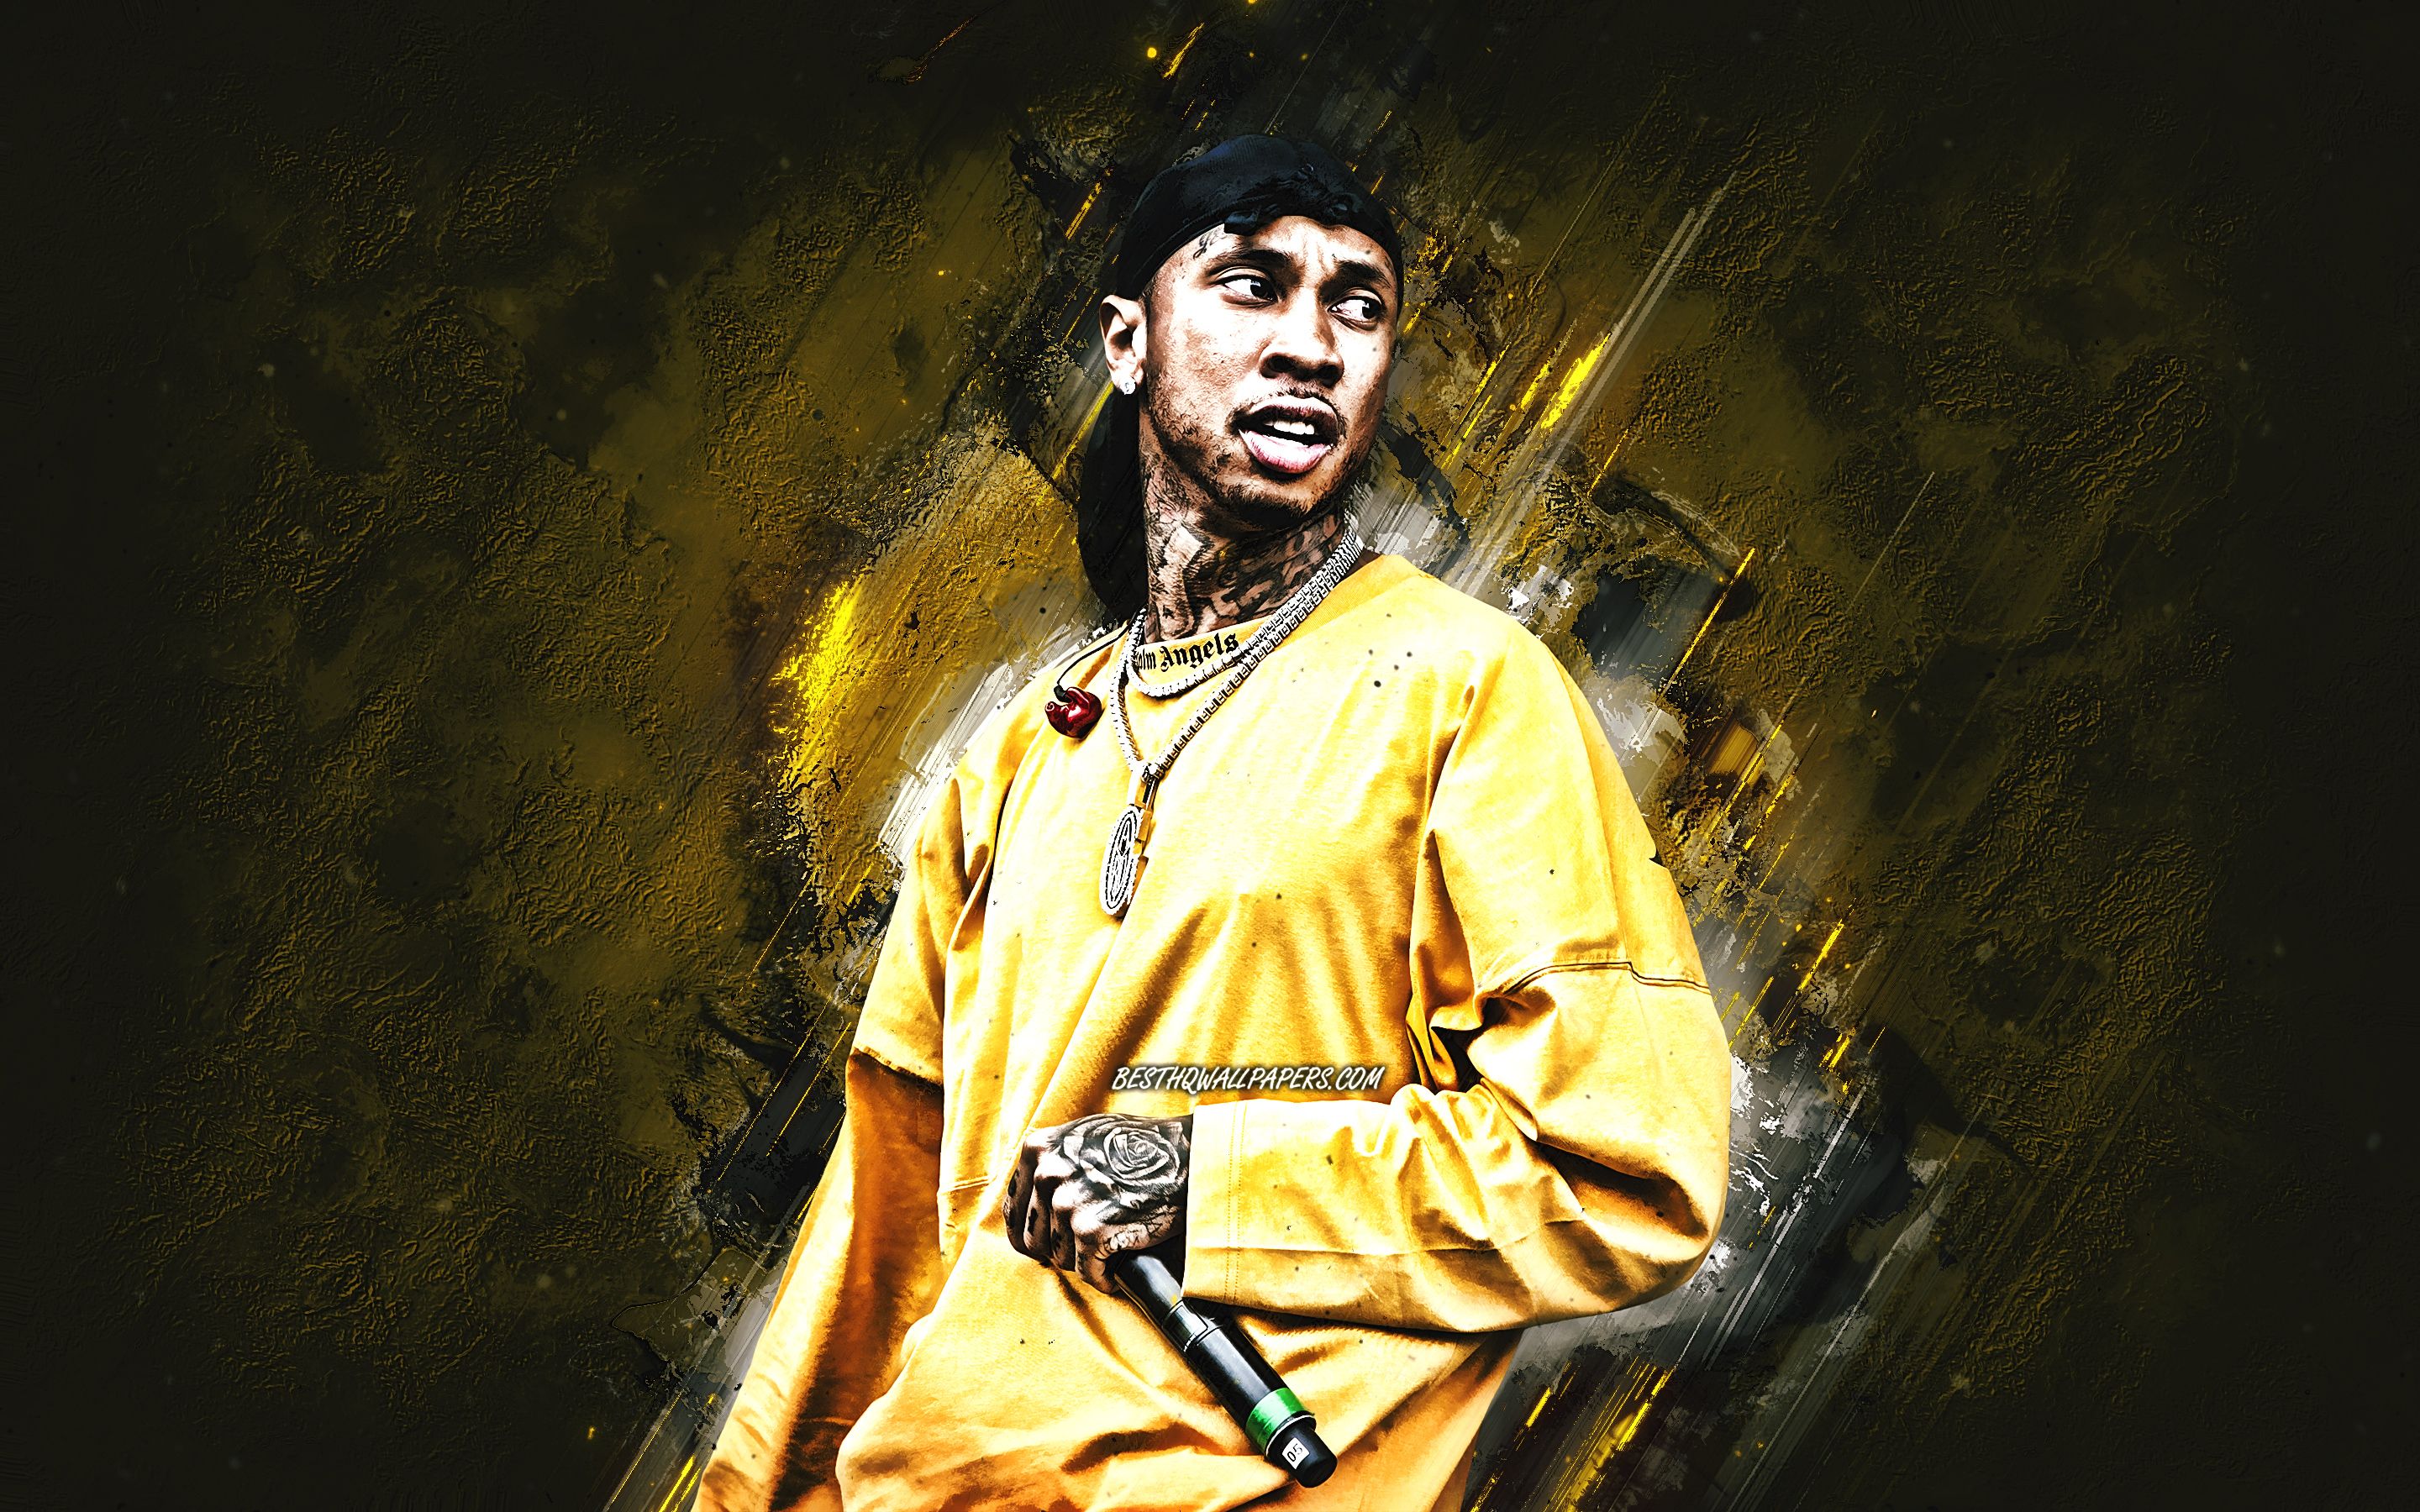 Download Wallpaper Tyga, American Rapper, Portrait, Yellow Stone Background, Michael Ray Nguyen Stevenson For Desktop With Resolution 2880x1800. High Quality HD Picture Wallpaper